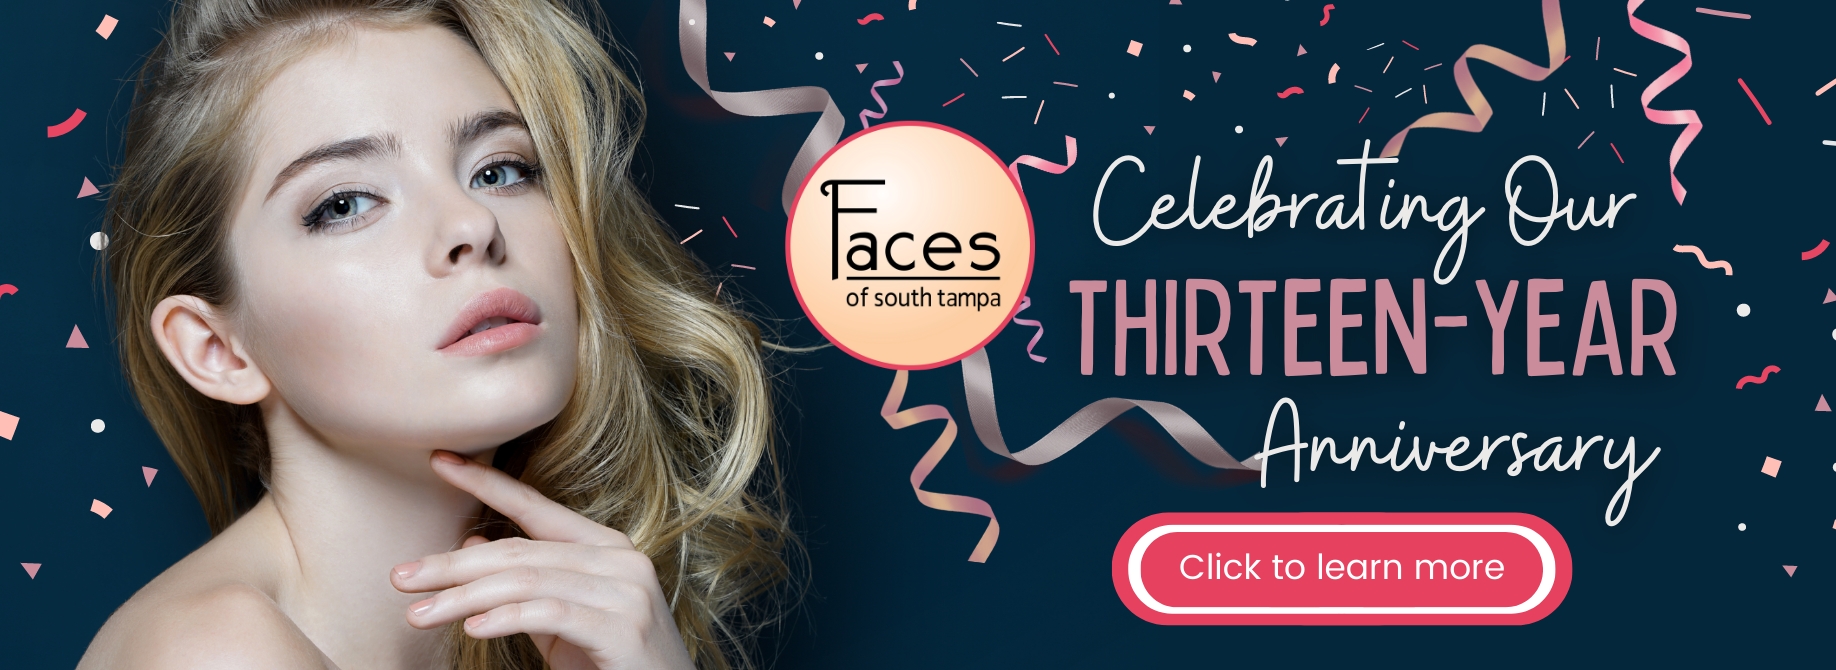 Faces of South Tampa Anniversary Specials